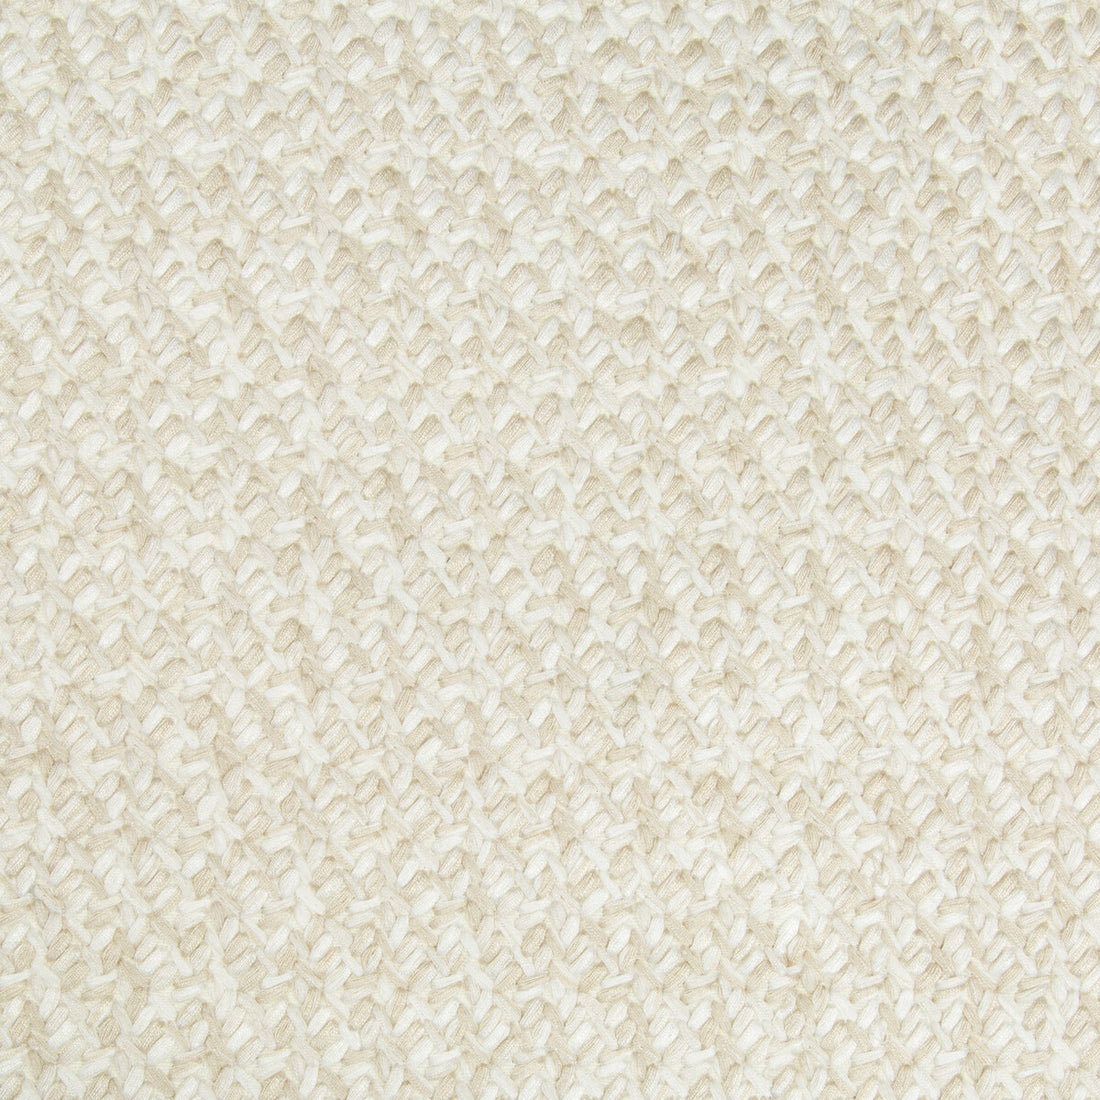 Lacing fabric in alabaster color - pattern 34921.116.0 - by Kravet Couture in the Modern Tailor collection